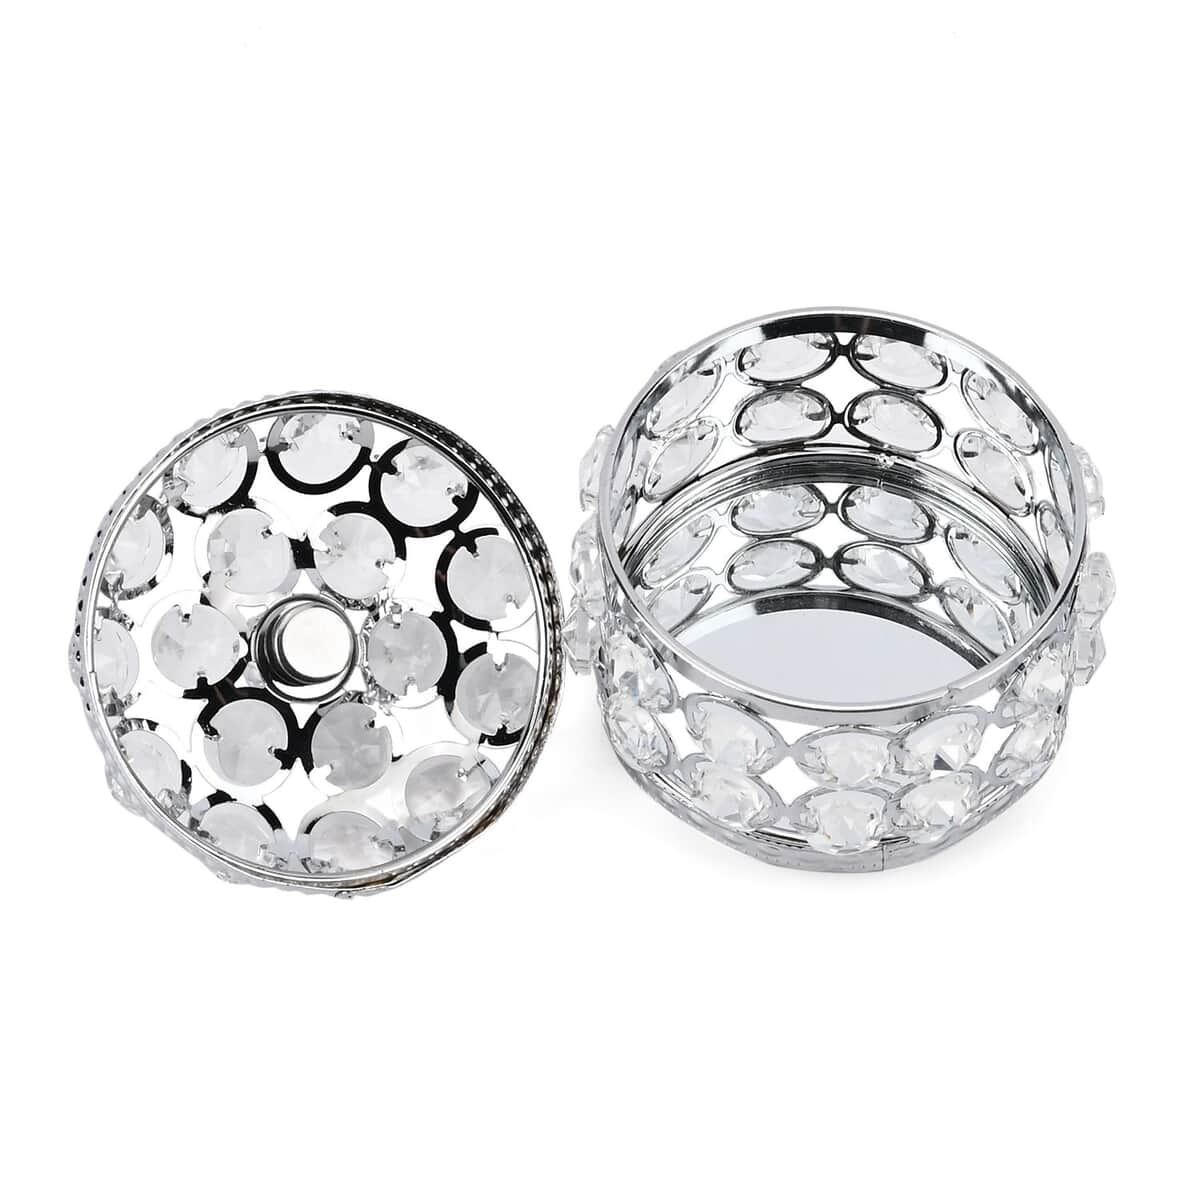 Silver Color Round Design Crystal Jewelry Box (3.9"x3.9"x3.5") image number 4